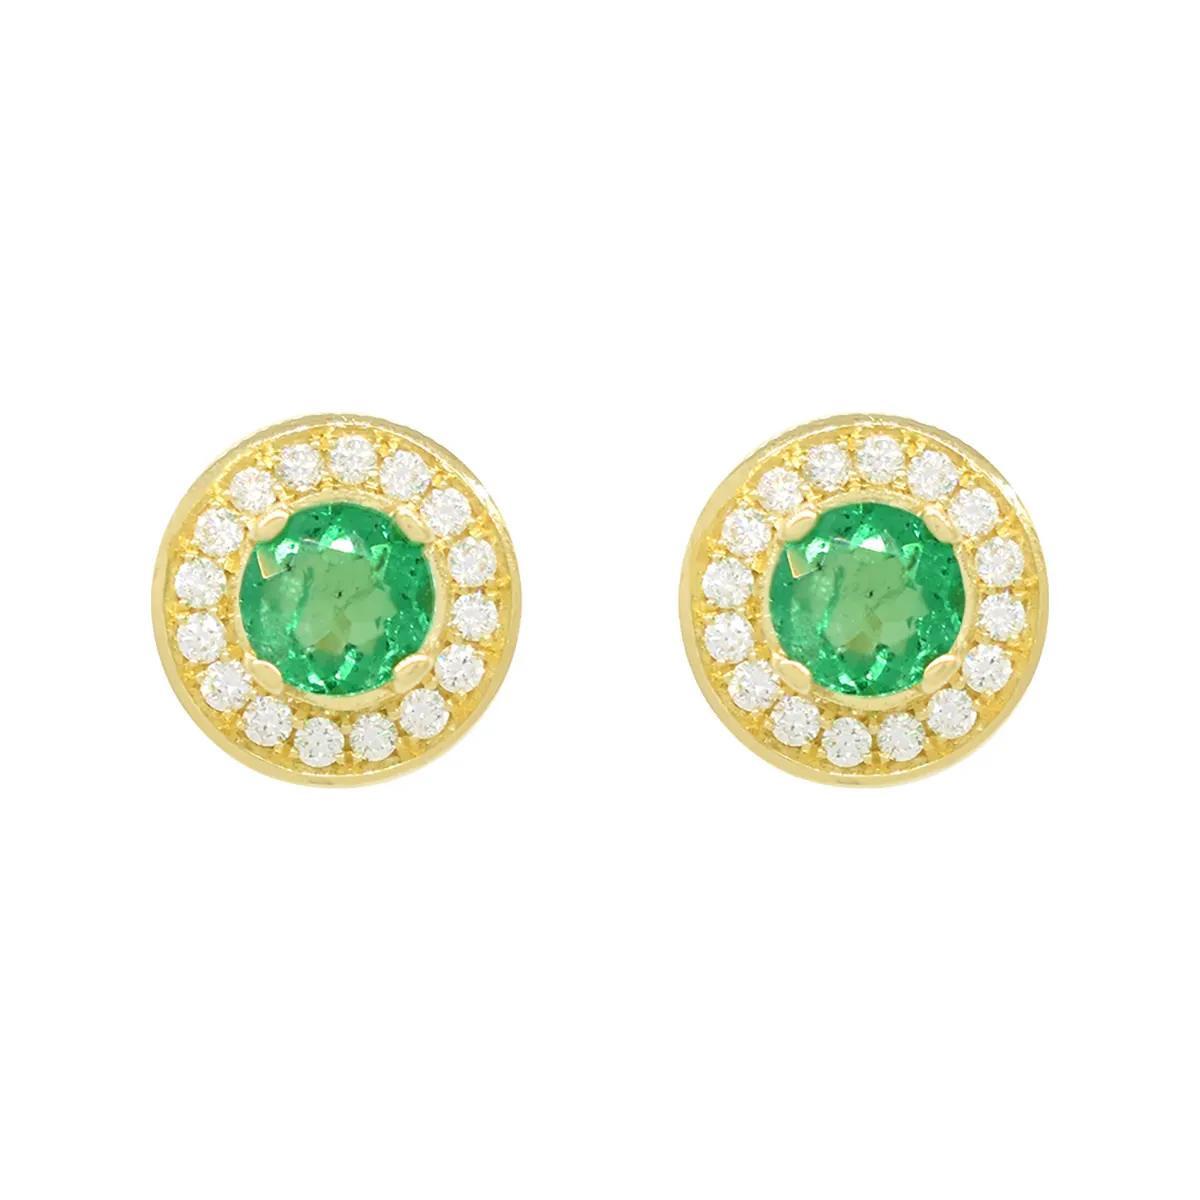 18k-yellow-gold-emerald-and-diamond-stud-earrings-in-micro-pave-setting